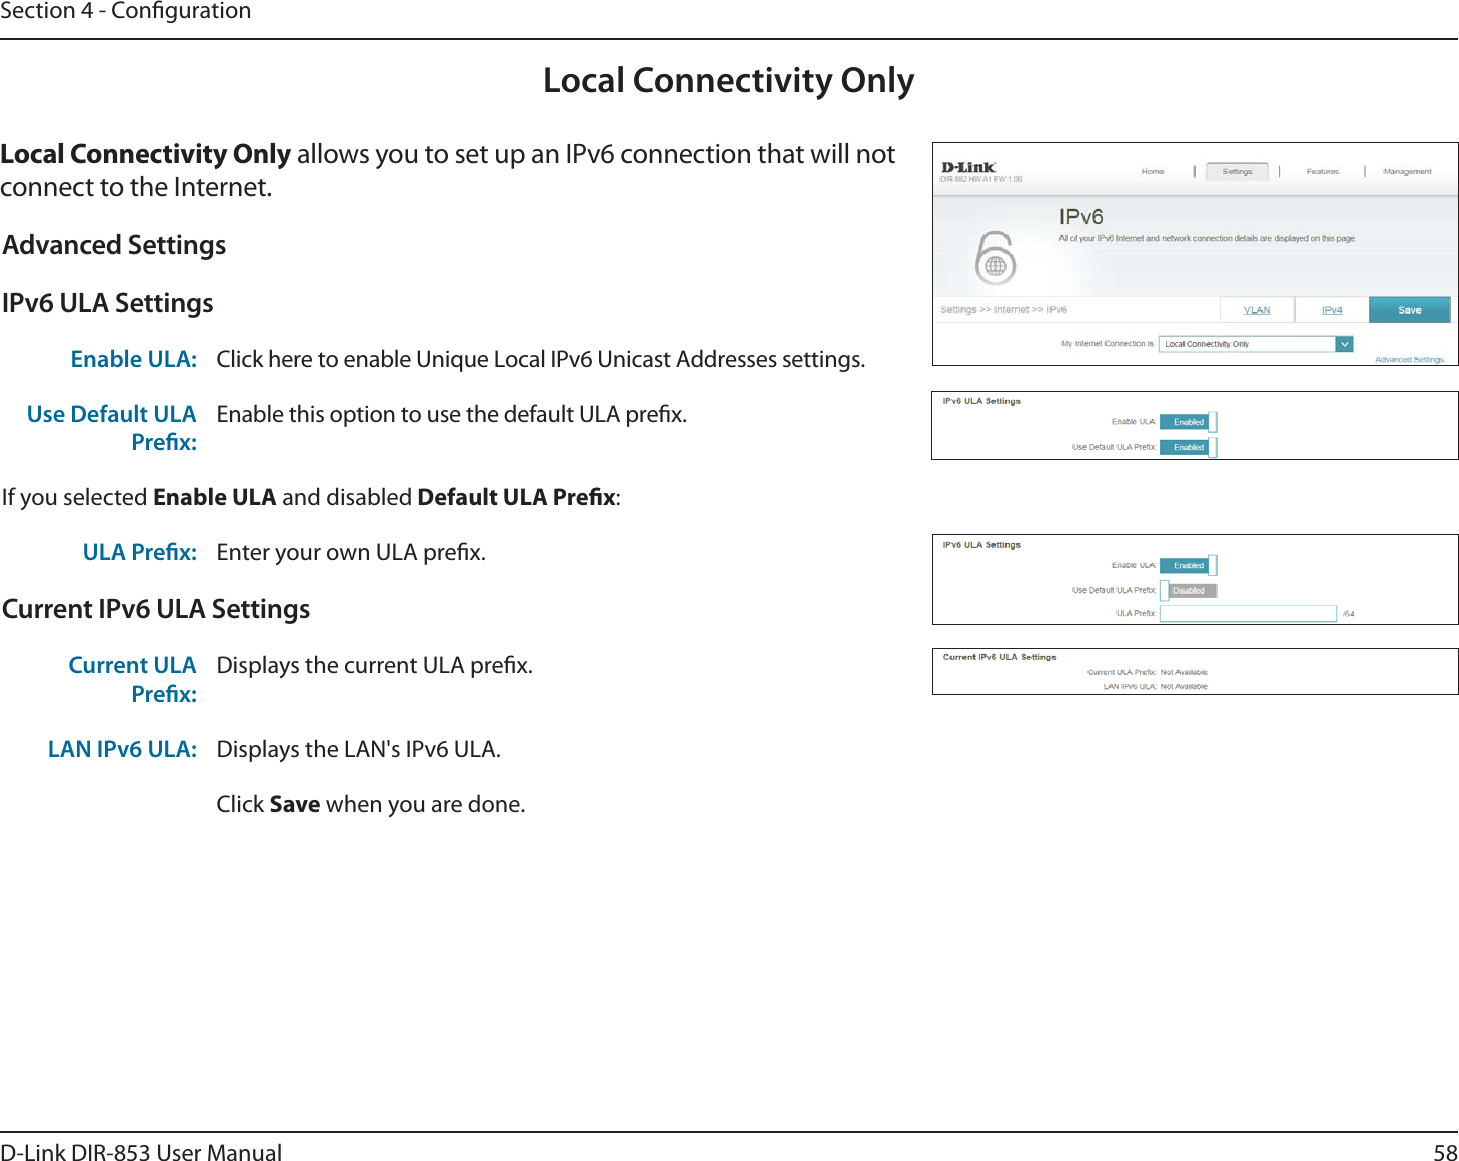 58D-Link DIR-853 User ManualSection 4 - CongurationLocal Connectivity OnlyLocal Connectivity Only allows you to set up an IPv6 connection that will not connect to the Internet.Advanced SettingsIPv6 ULA SettingsEnable ULA: Click here to enable Unique Local IPv6 Unicast Addresses settings.Use Default ULA Prex:Enable this option to use the default ULA prex.If you selected Enable ULA and disabled Default ULA Prex:ULA Prex: Enter your own ULA prex.Current IPv6 ULA SettingsCurrent ULA Prex:Displays the current ULA prex. LAN IPv6 ULA: Displays the LAN&apos;s IPv6 ULA.Click Save when you are done.